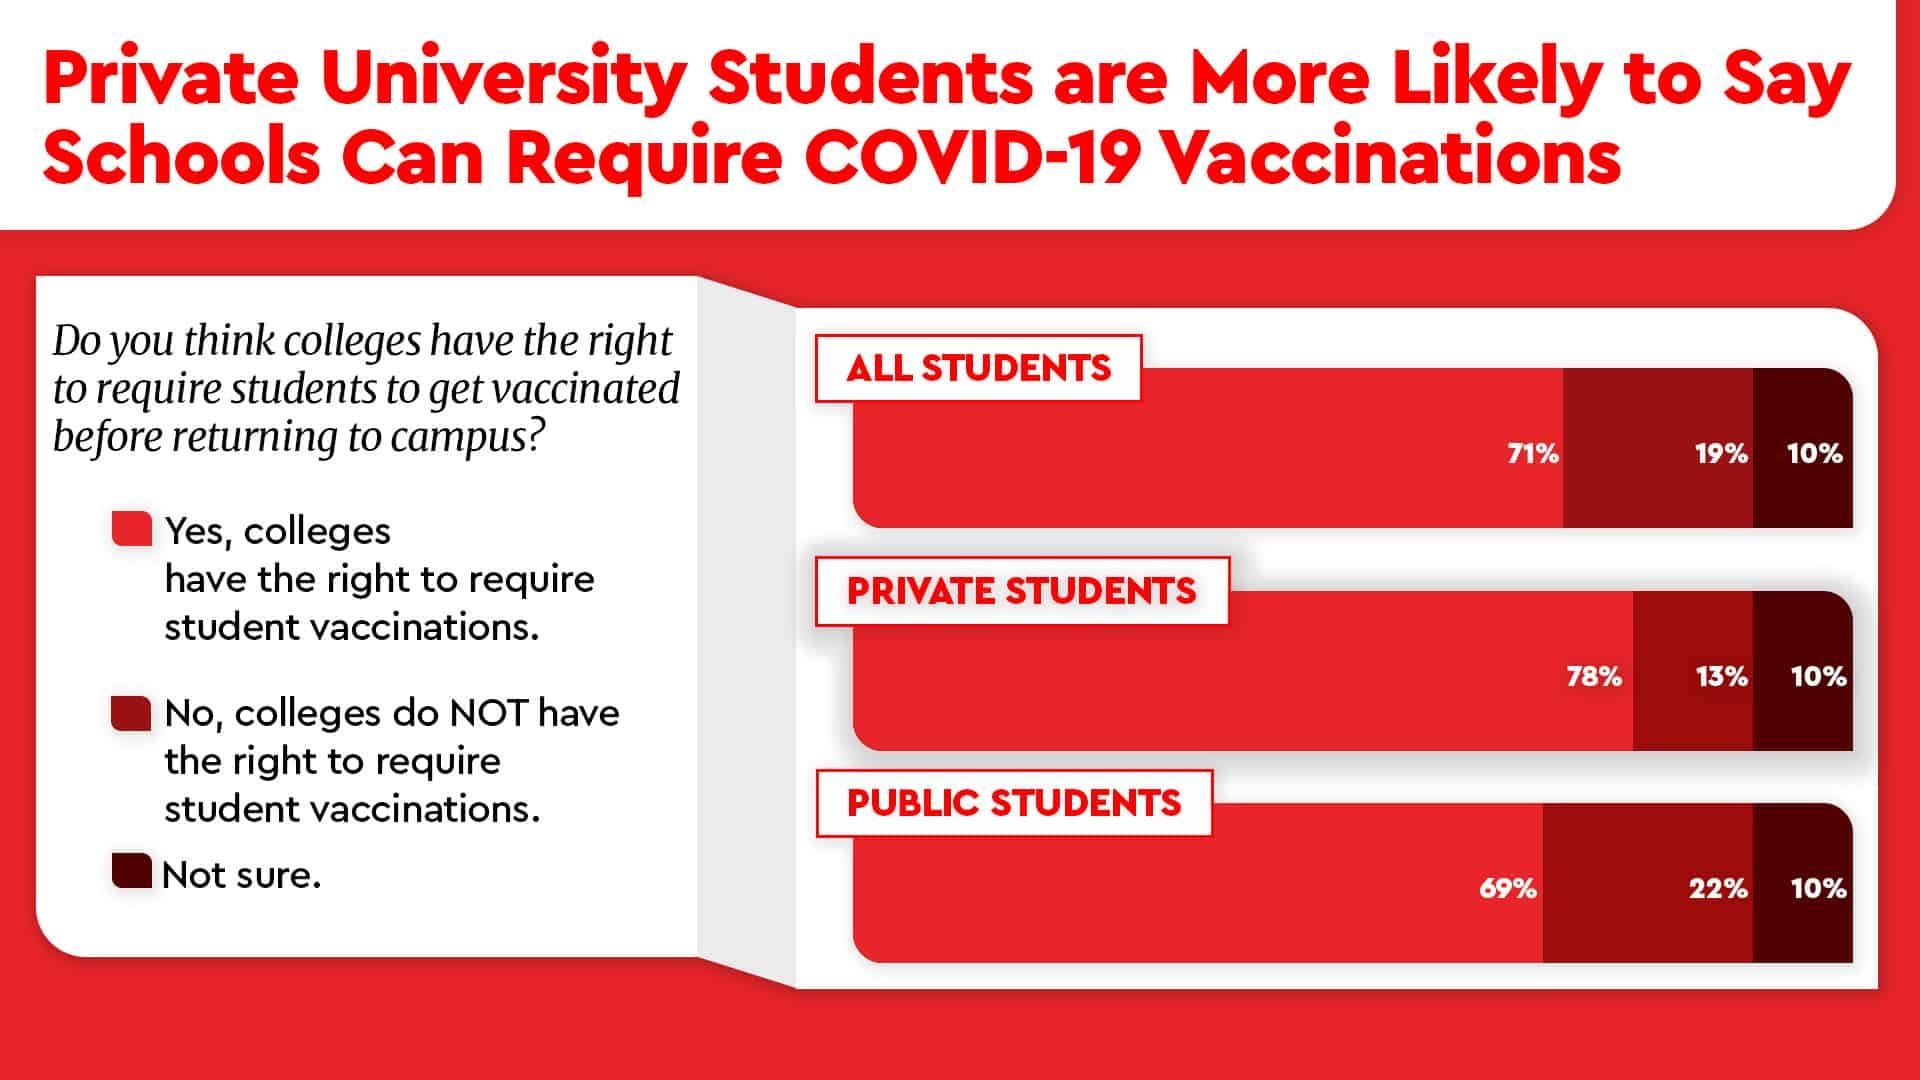 private university students are more likely to say schools can requre covid 19 vaccinations e1624366666422 p91io81w1zxs01r3k6nturgyggb3im9n2bc17ifmyo